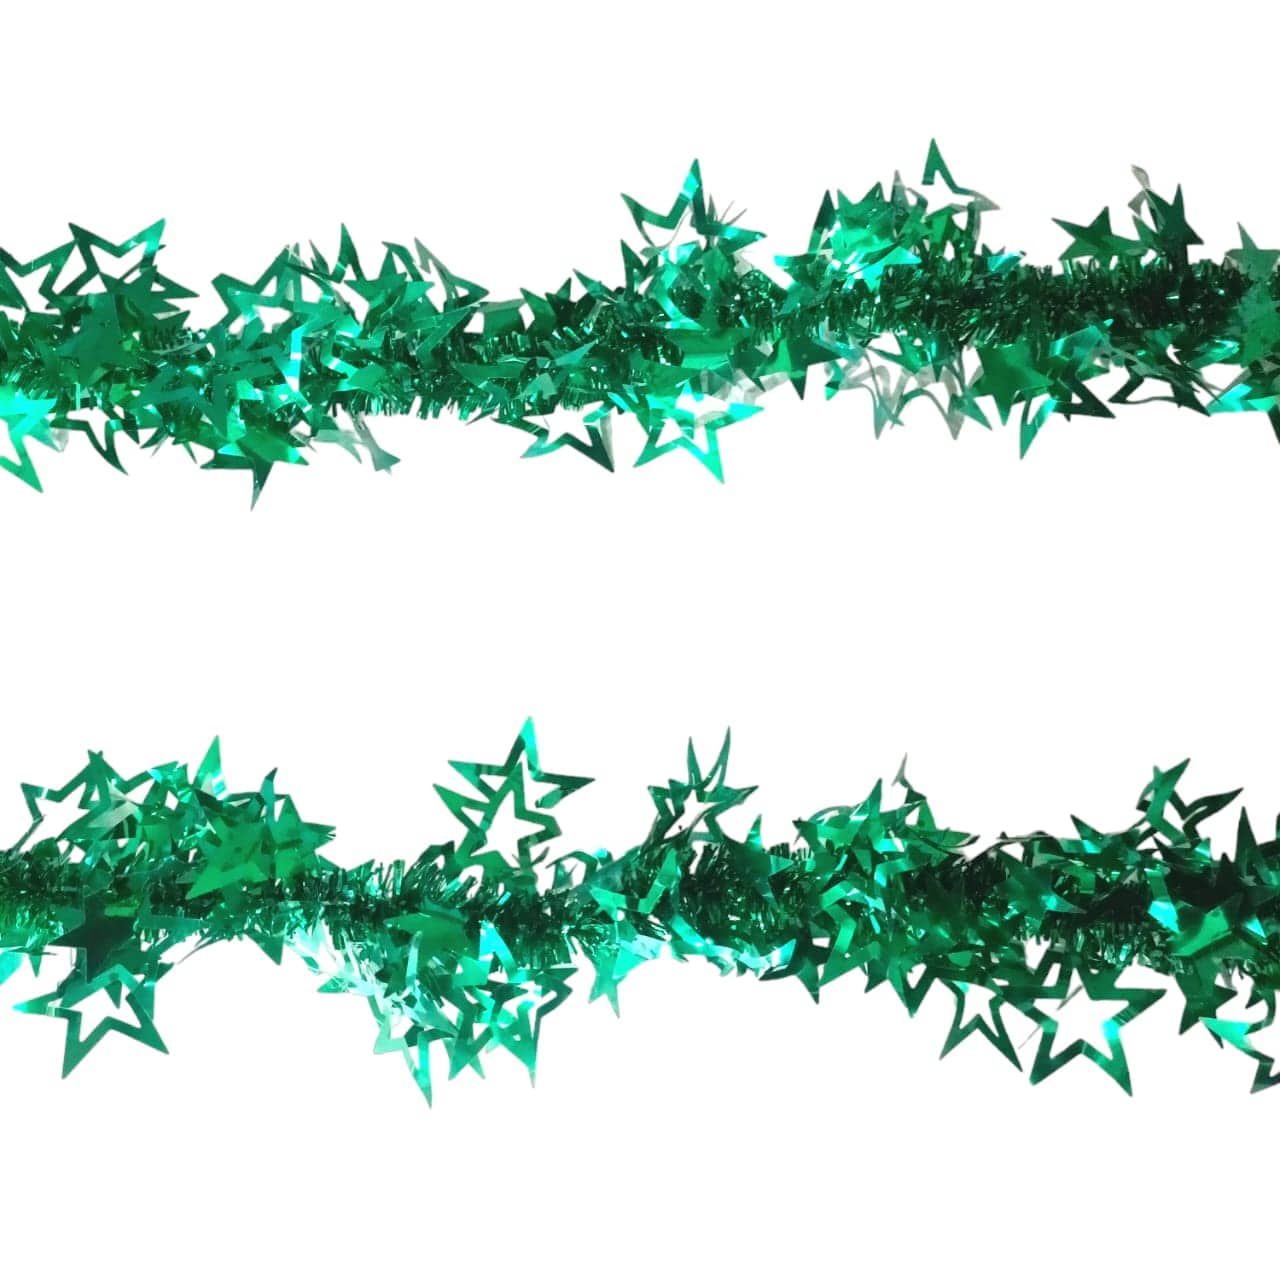 Eva party shop Decoration Green Christmas Garland Tinsel Stars - Sparkling Holiday Decoration for Festive Ambiance (pack of 1)